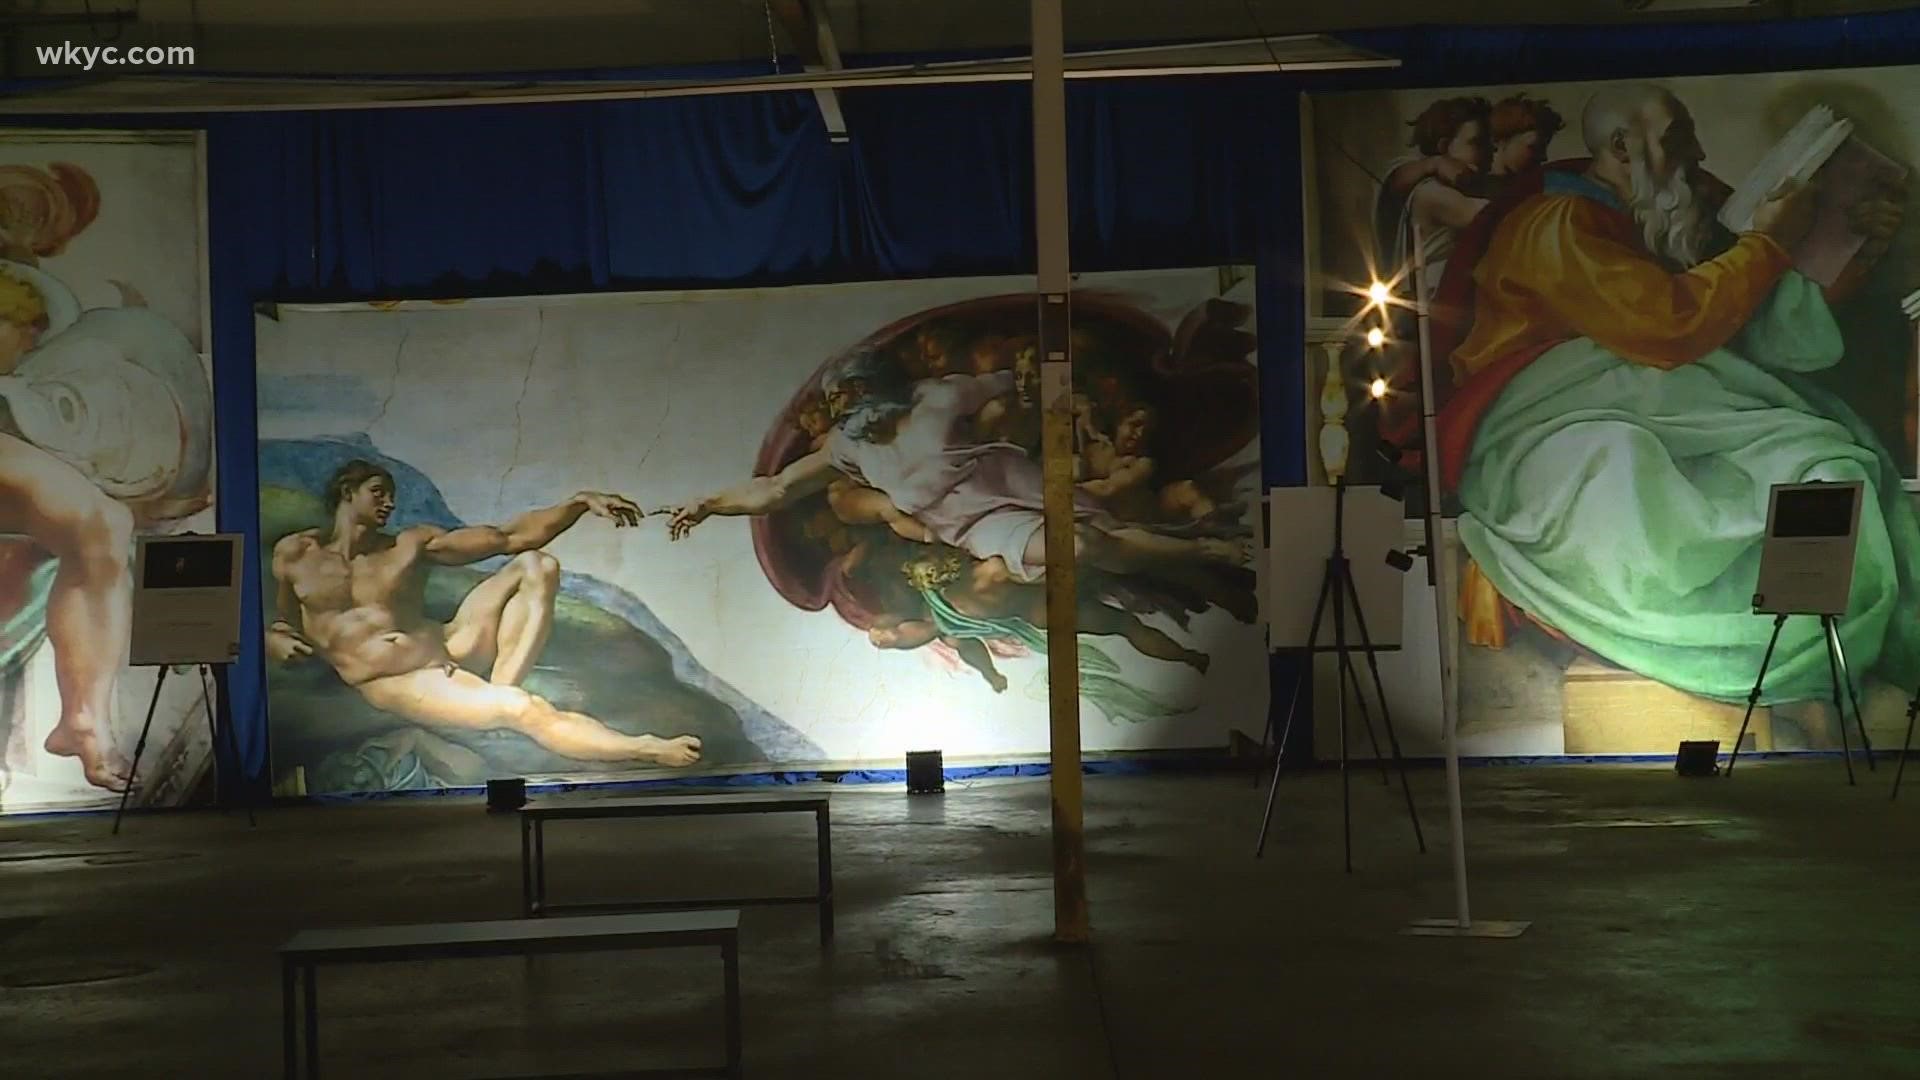 The Michelangelo Sistine Chapel Exhibit runs through the end of February in Mentor.